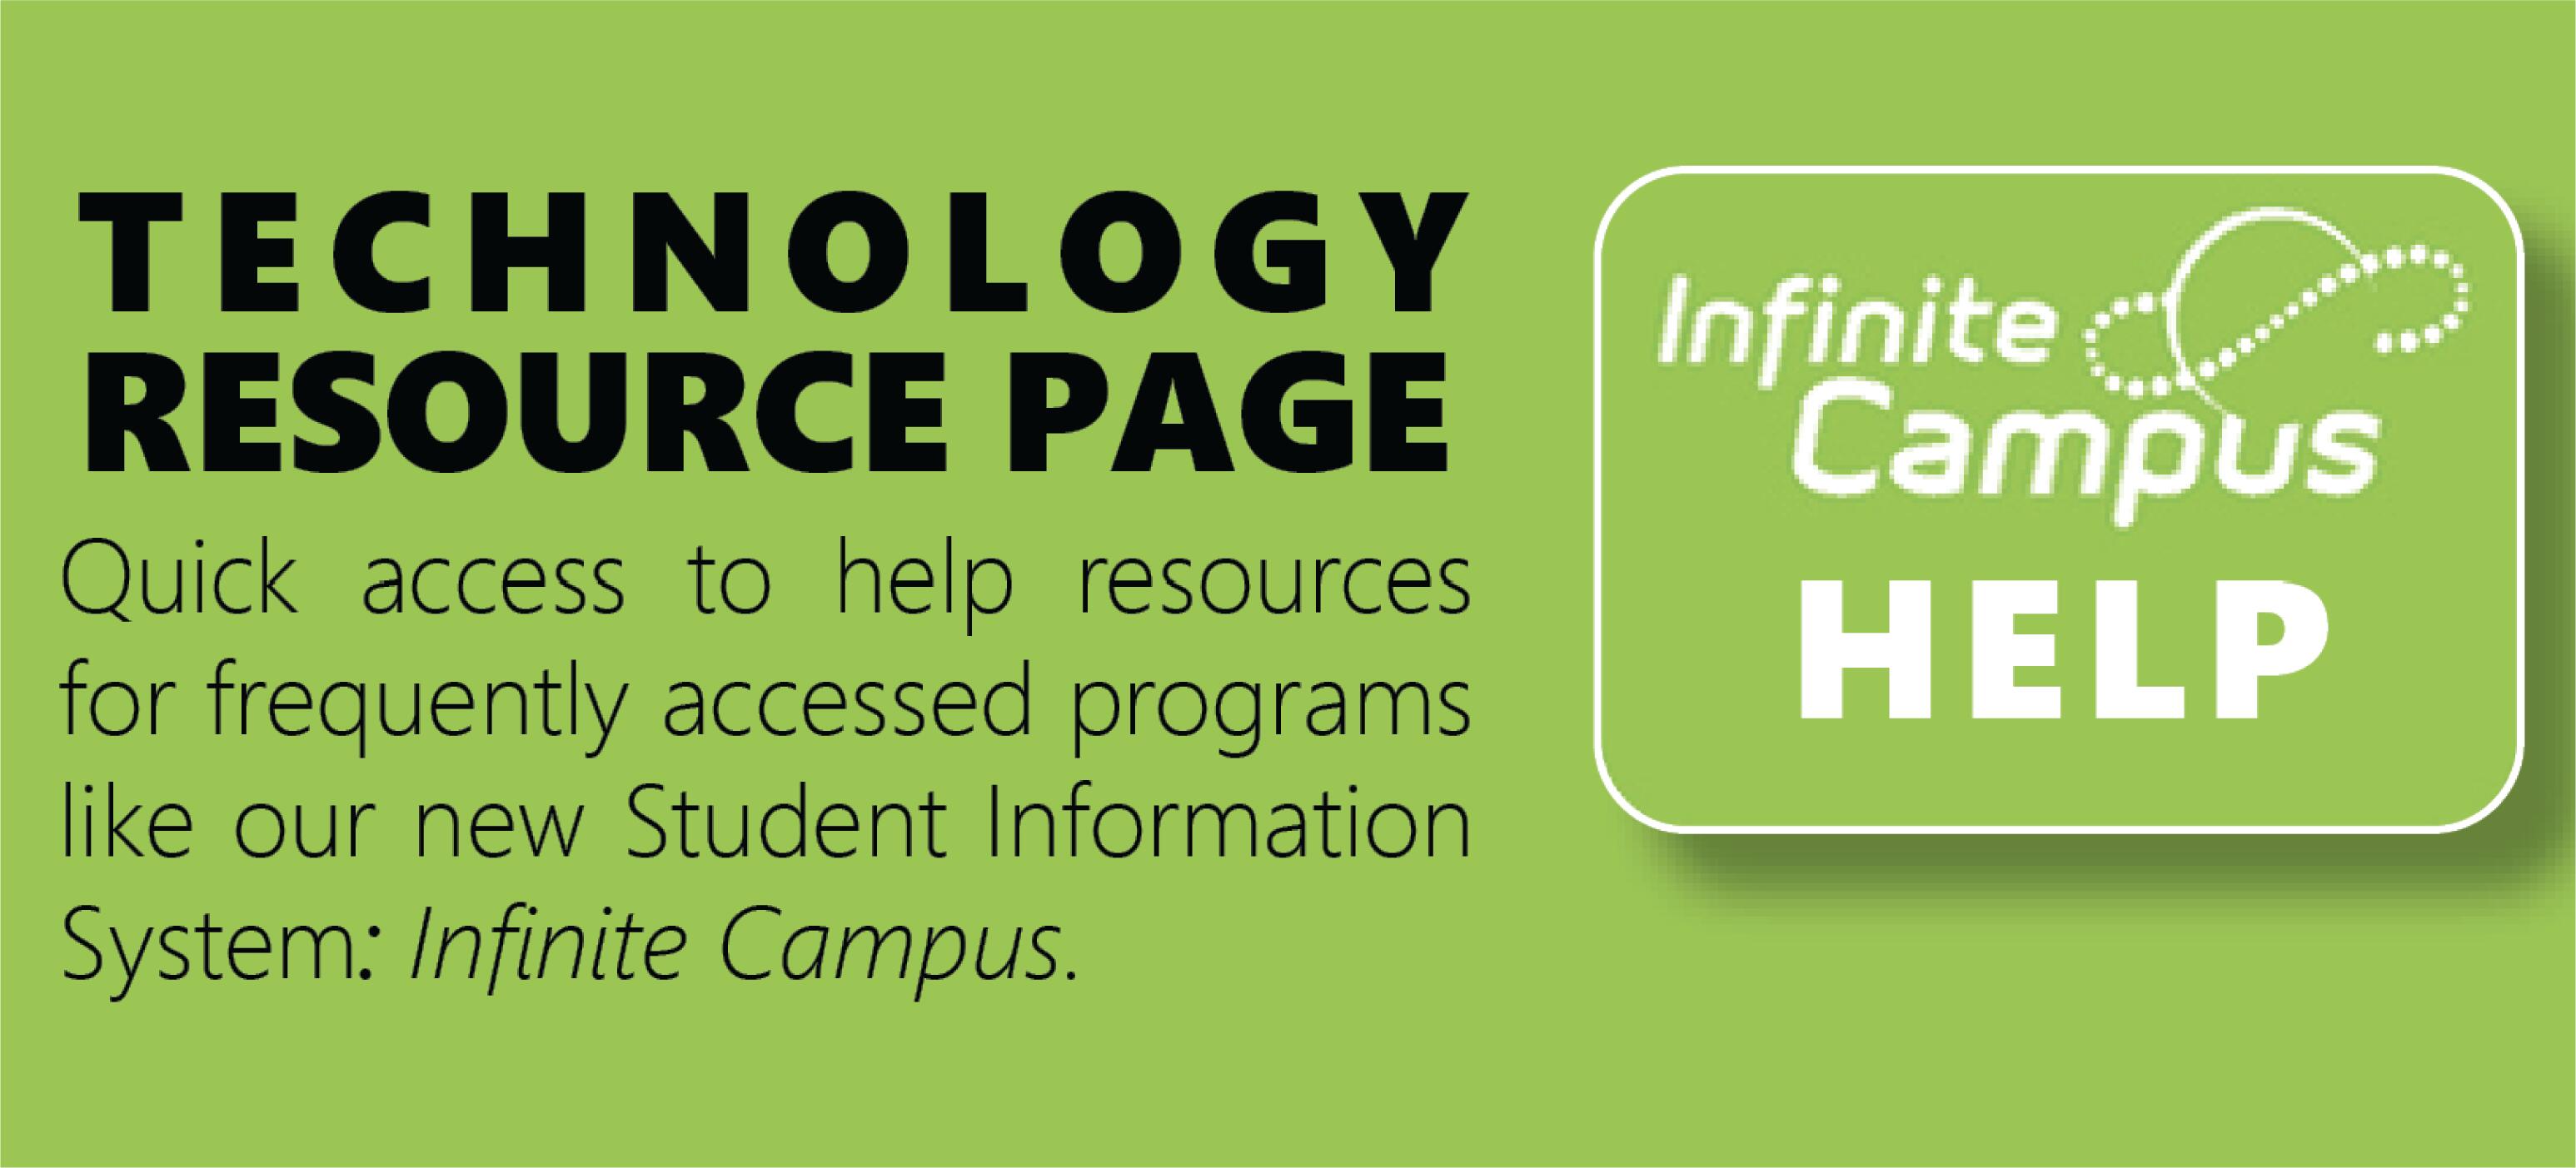 Infinite Campus Technology Resource Page